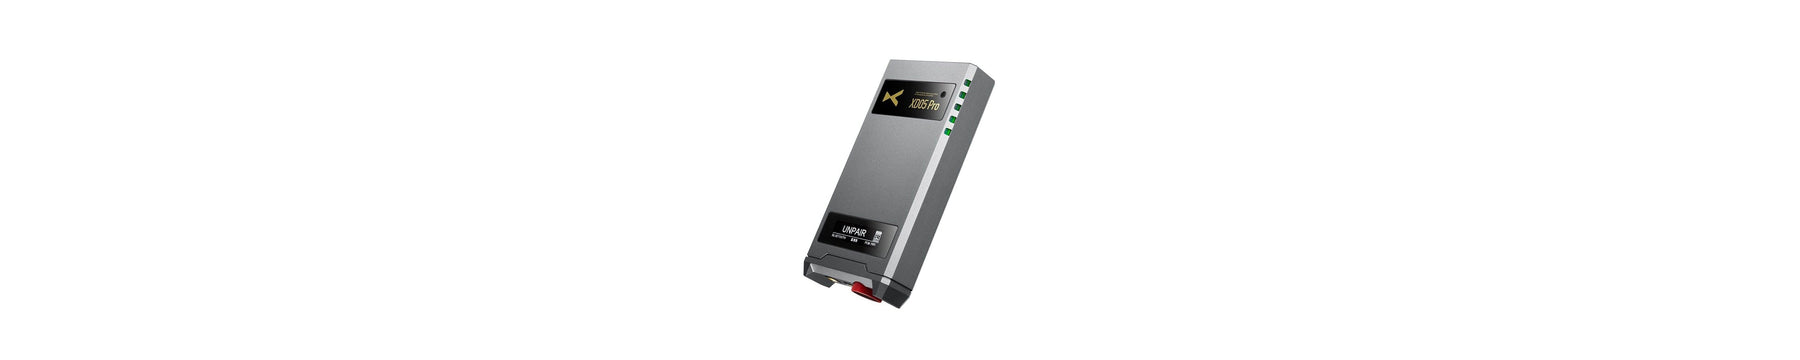 xDuoo XD05 Pro Flagship Portable USB DAC/AMP With Swappable Audio Module Design